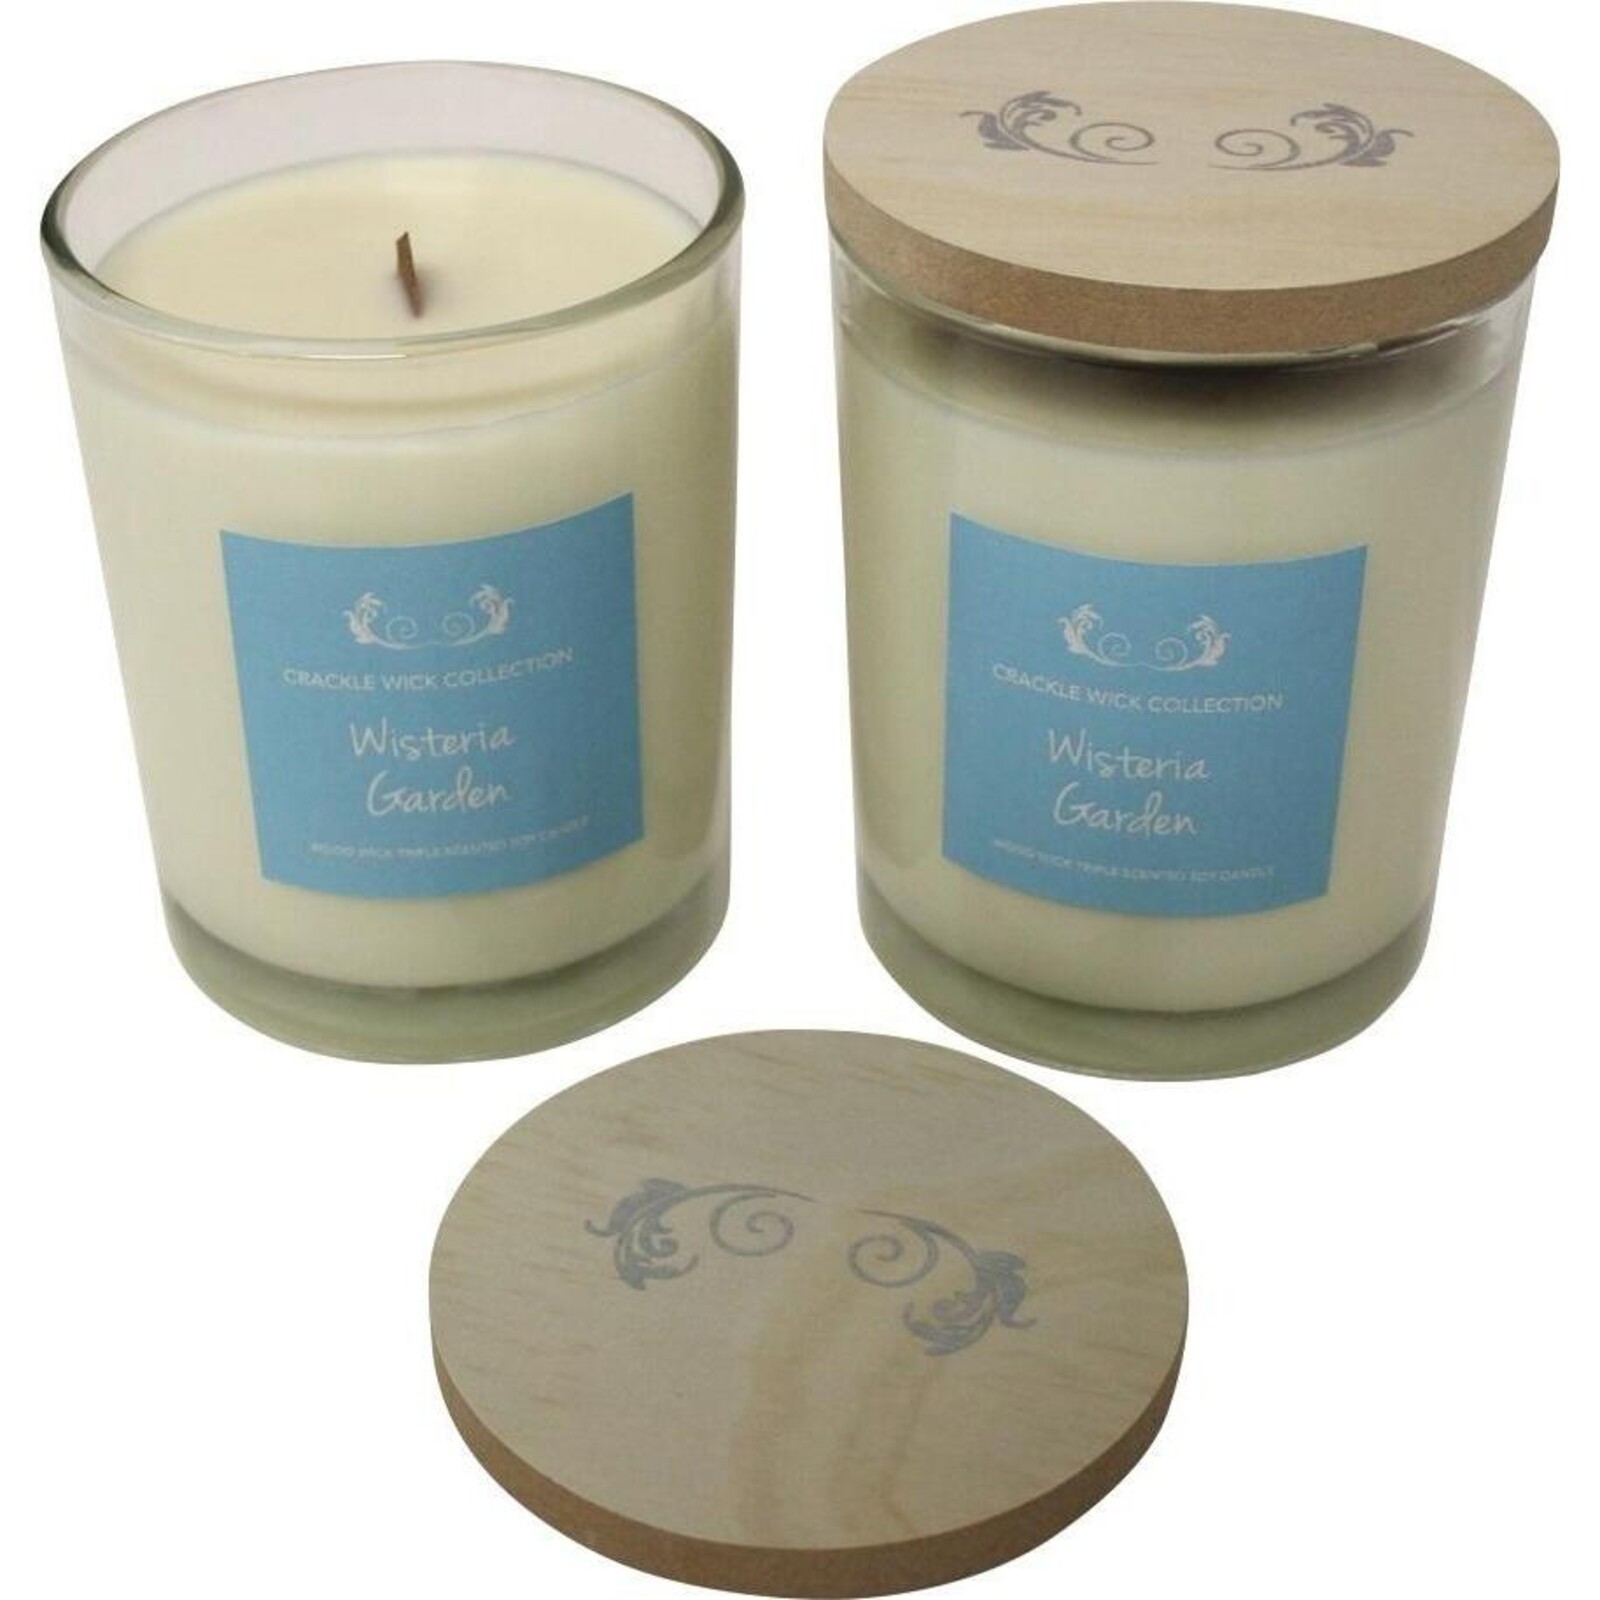 Candle Soy Crackle Wick Wisteria Garden Lrg